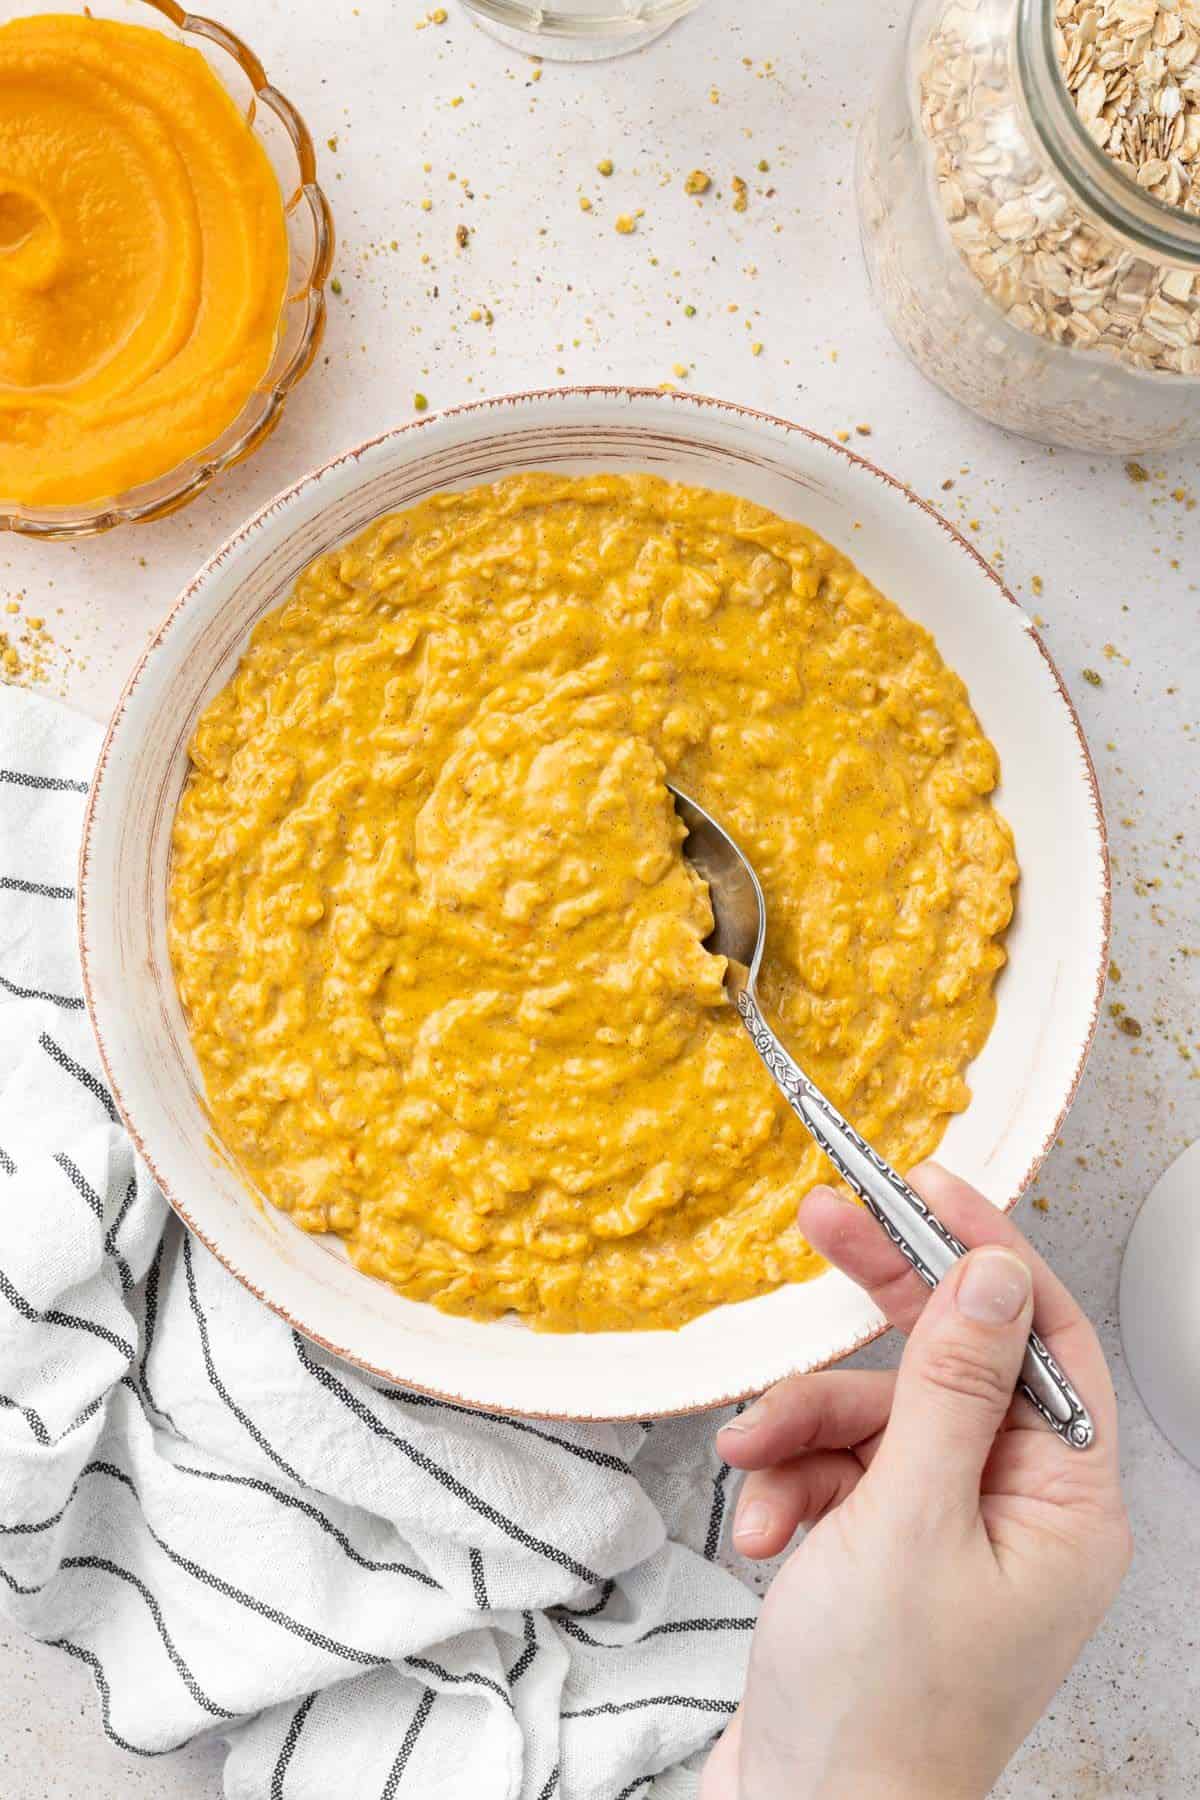 Round white bowl of pumpkin porridge with a spoon scooping up some of the mixture.